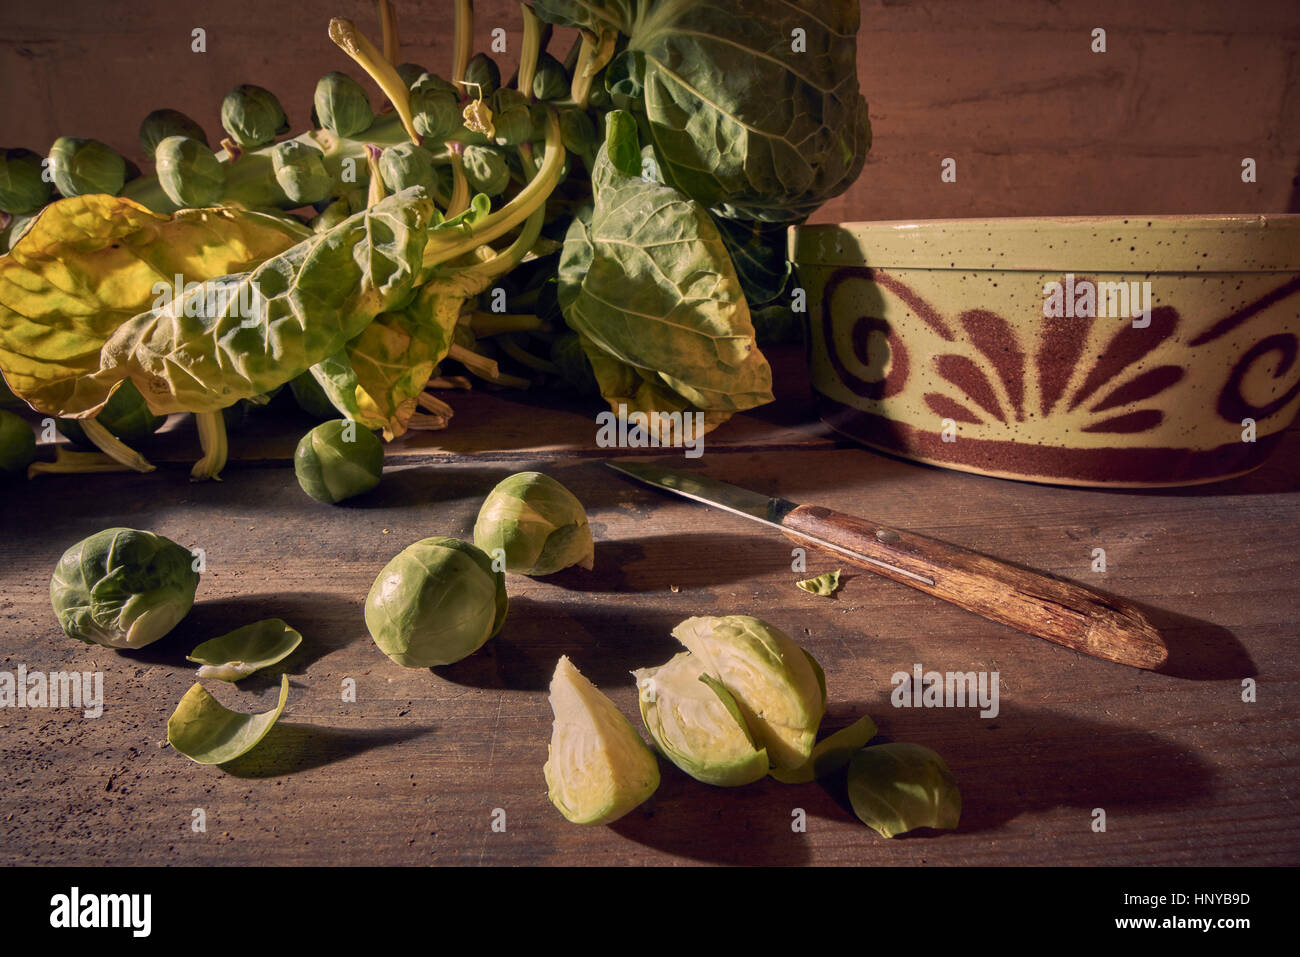 Brussel sprouts being prepared for eating Stock Photo